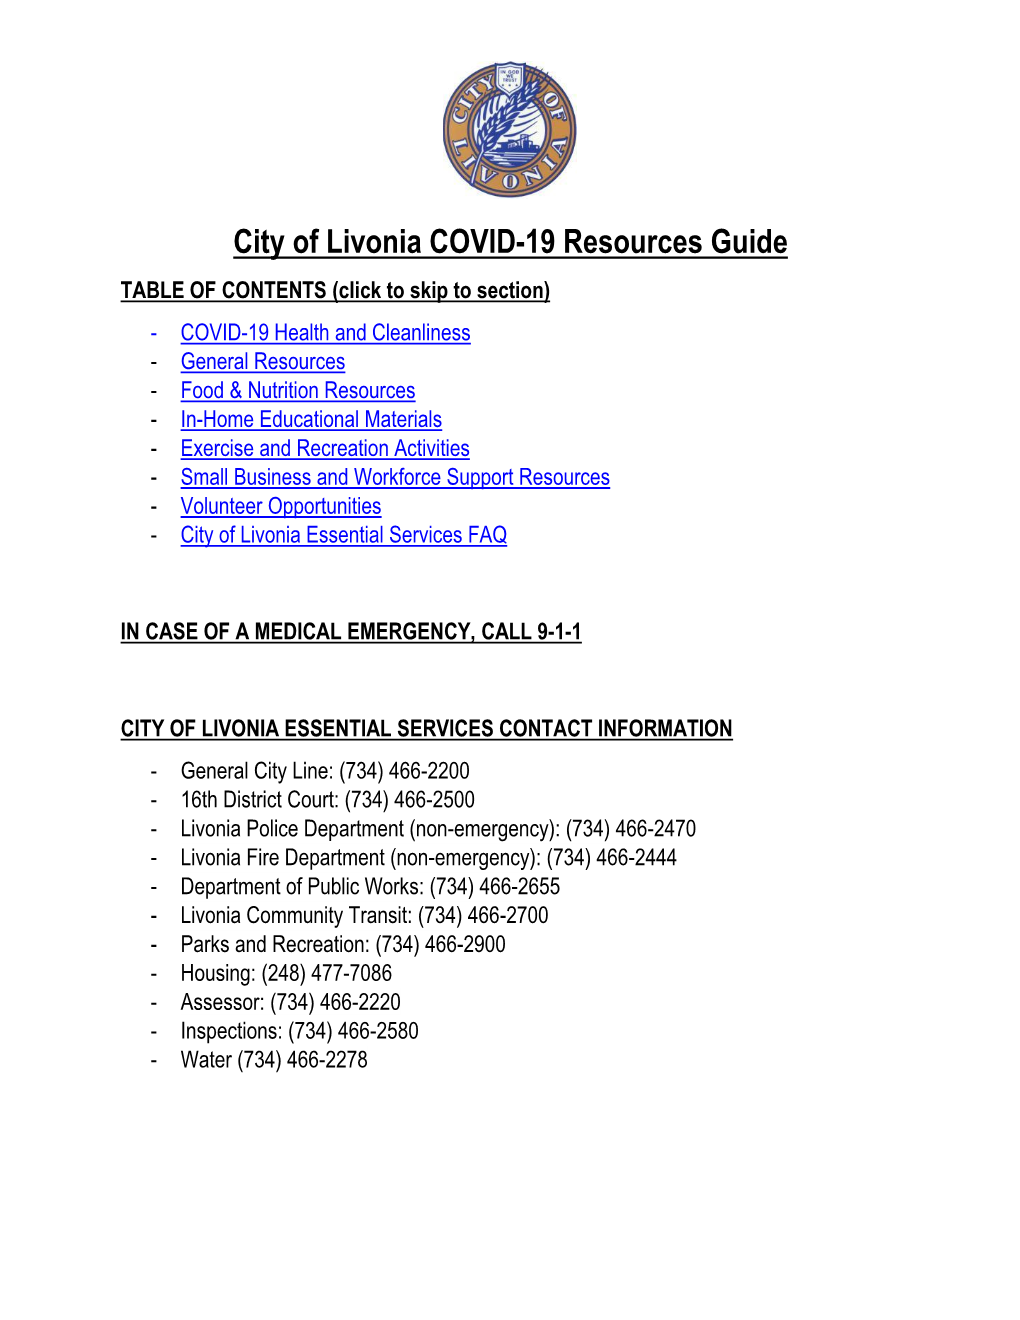 City of Livonia COVID-19 Resources Guide